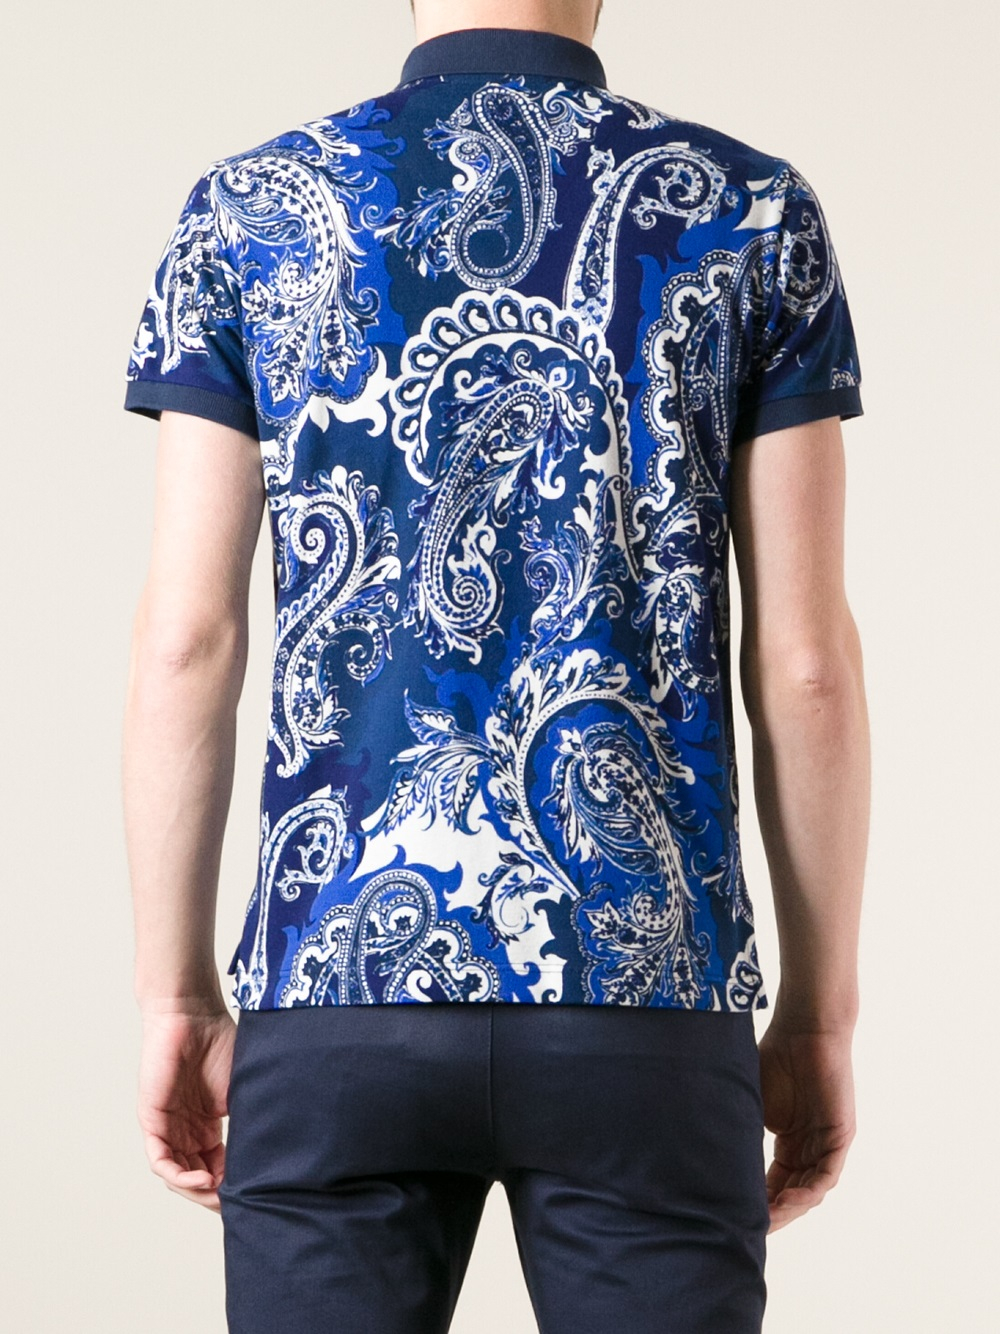 Etro Paisley Print Polo Shirt in Blue for Men - Lyst